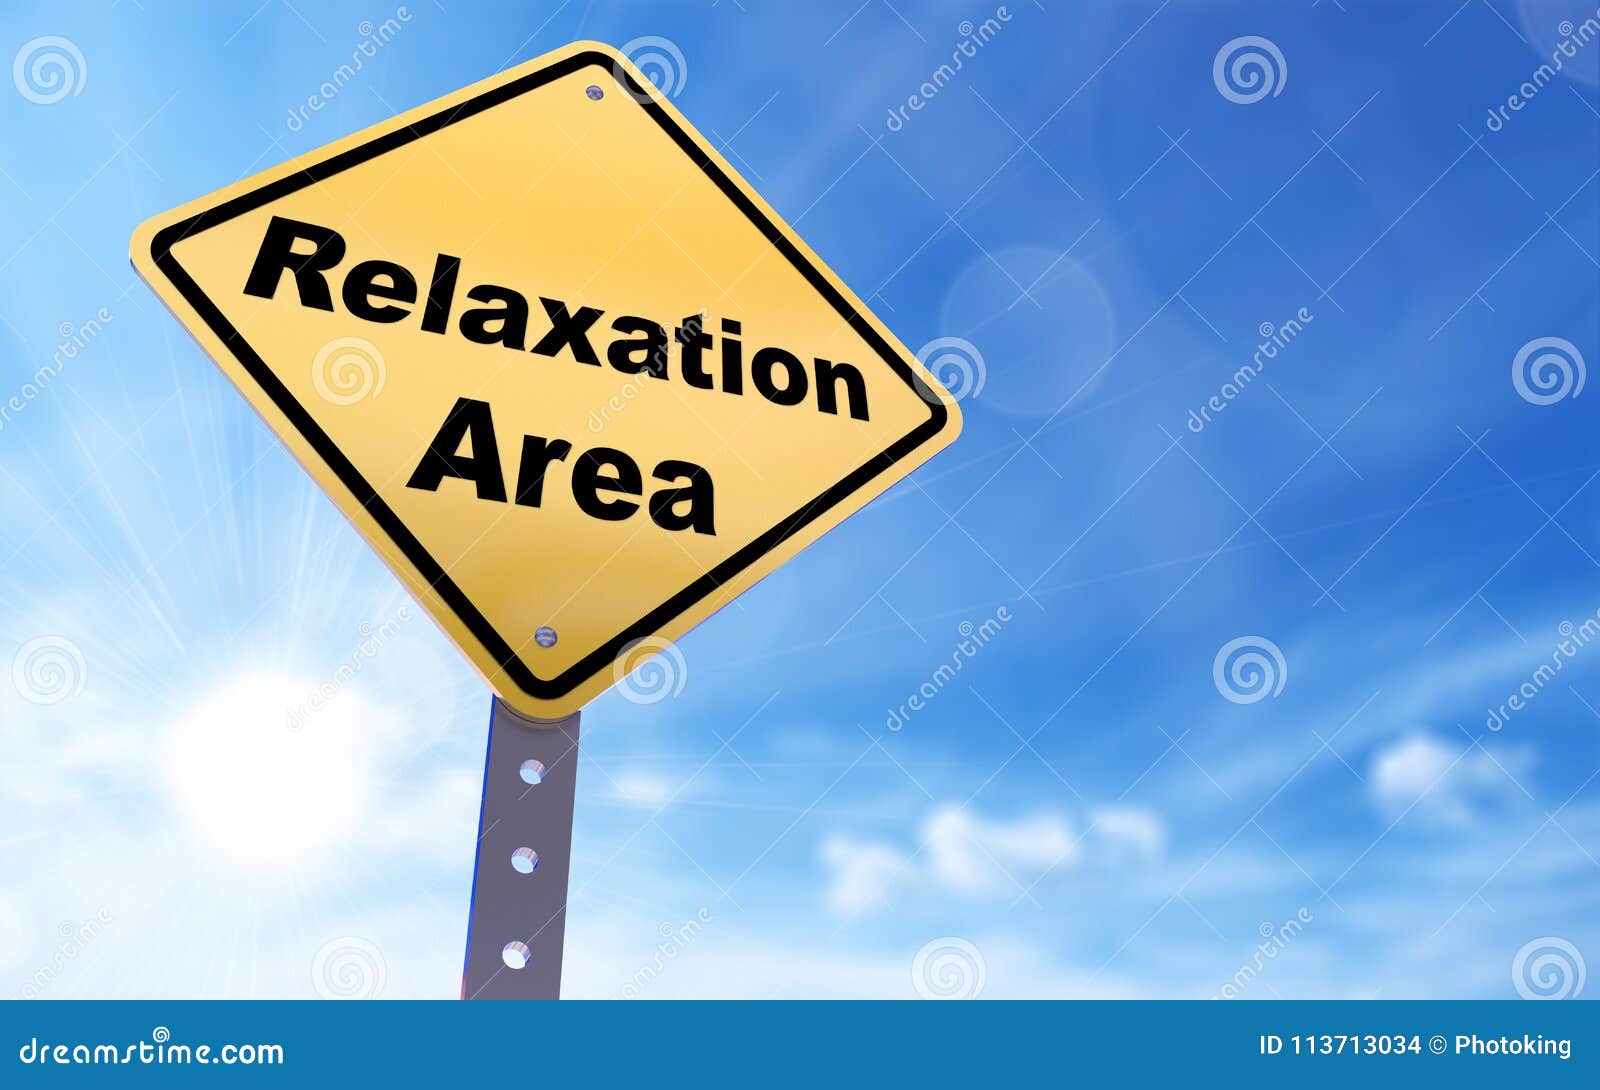 relaxation area sign